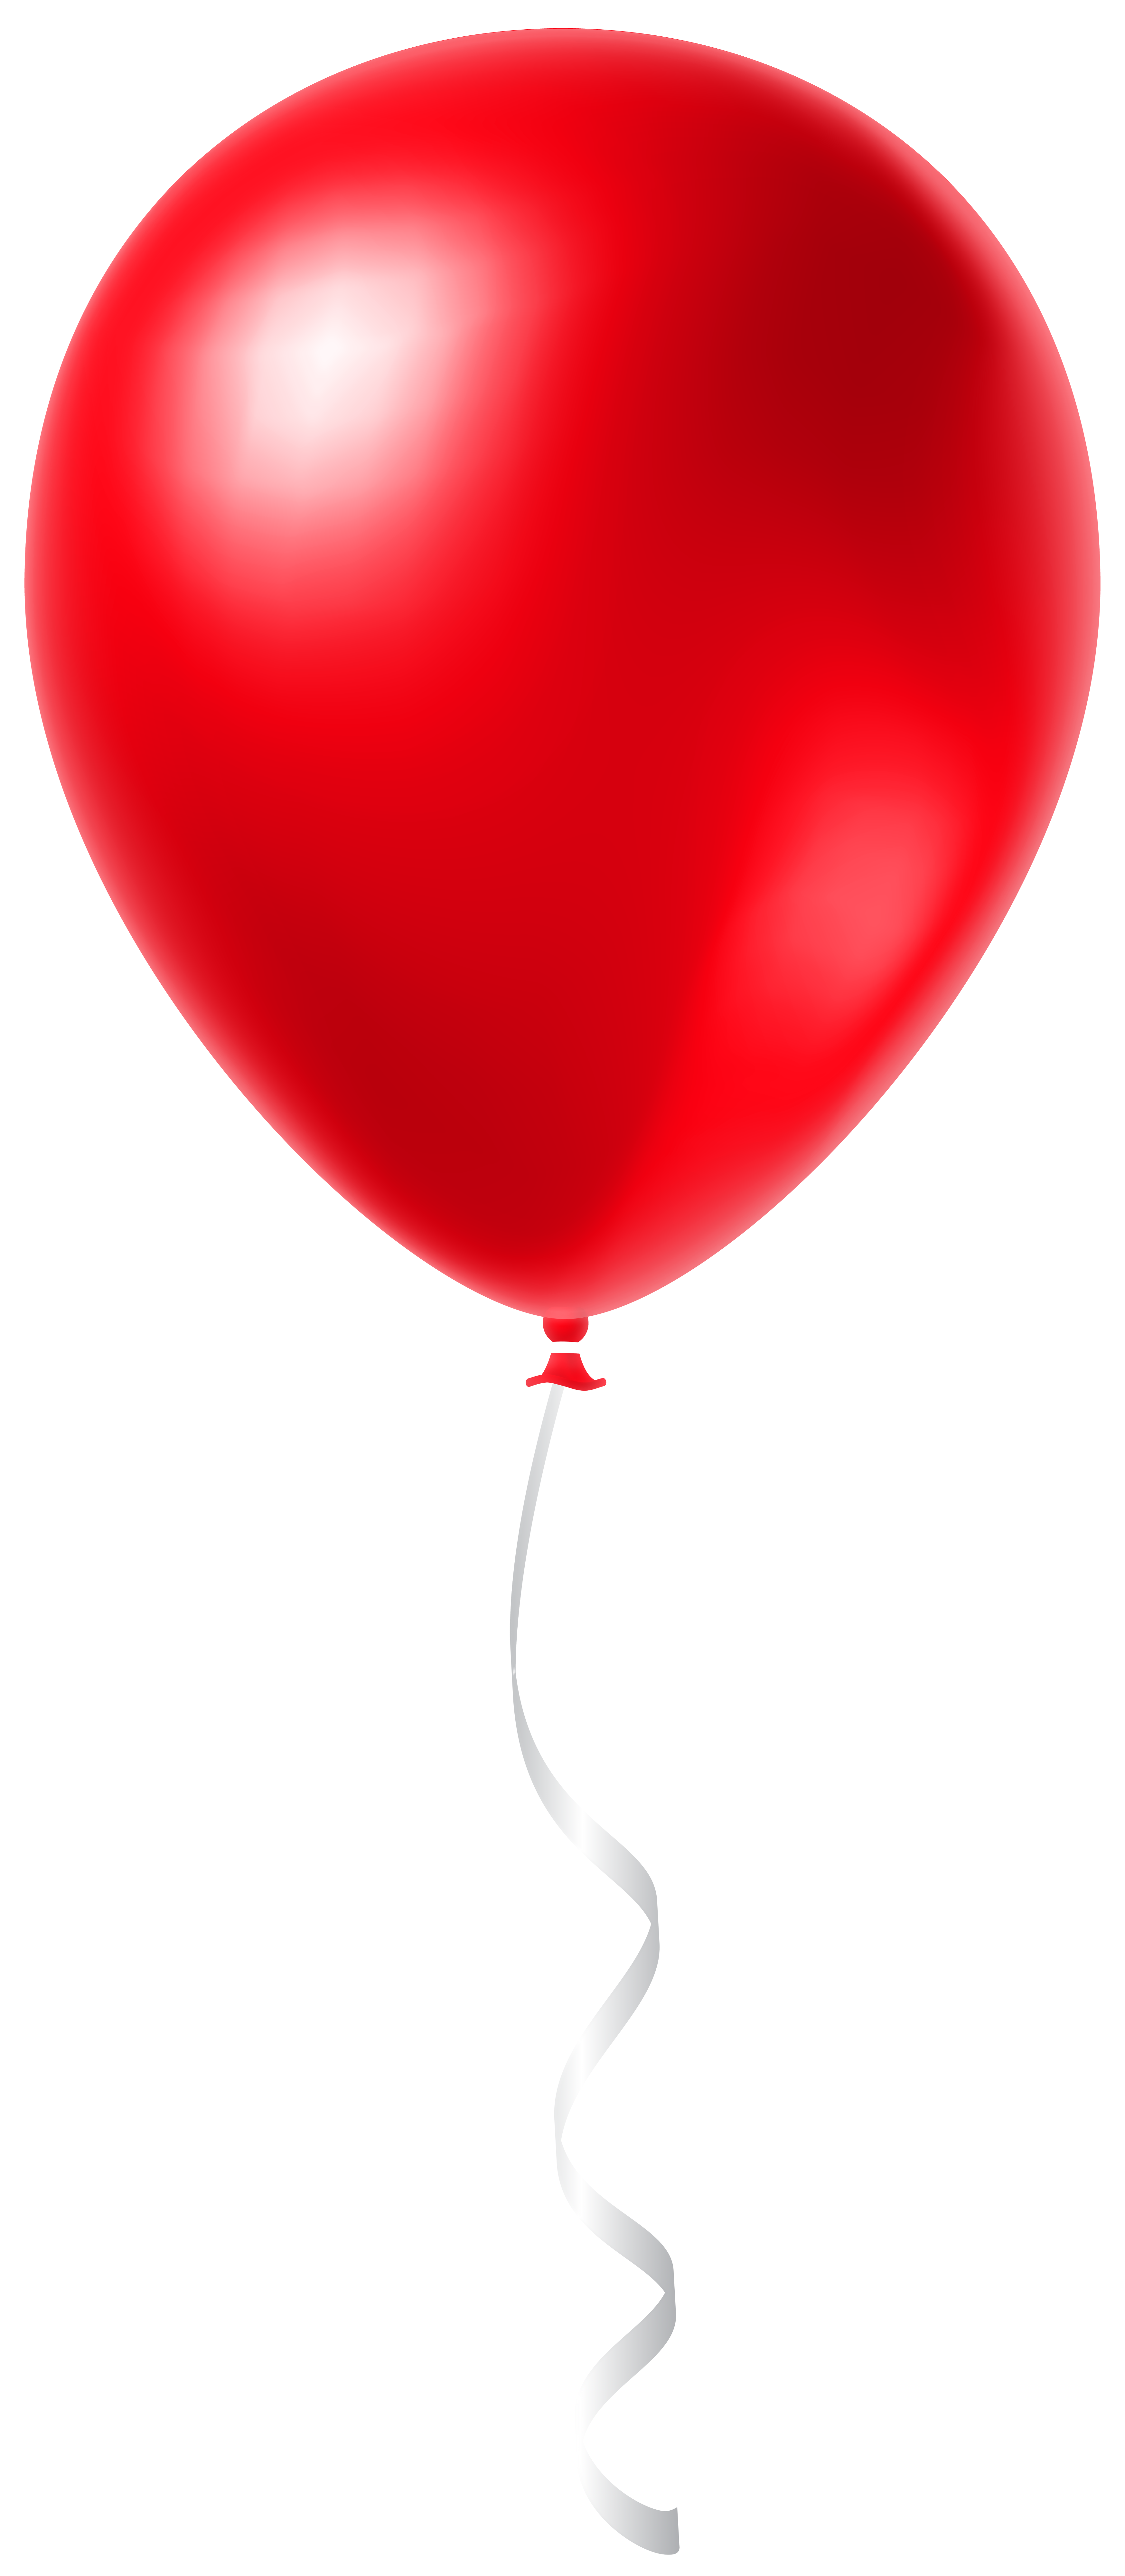 Red Single Balloon Transparent Clipart | Gallery Yopriceville - High ...